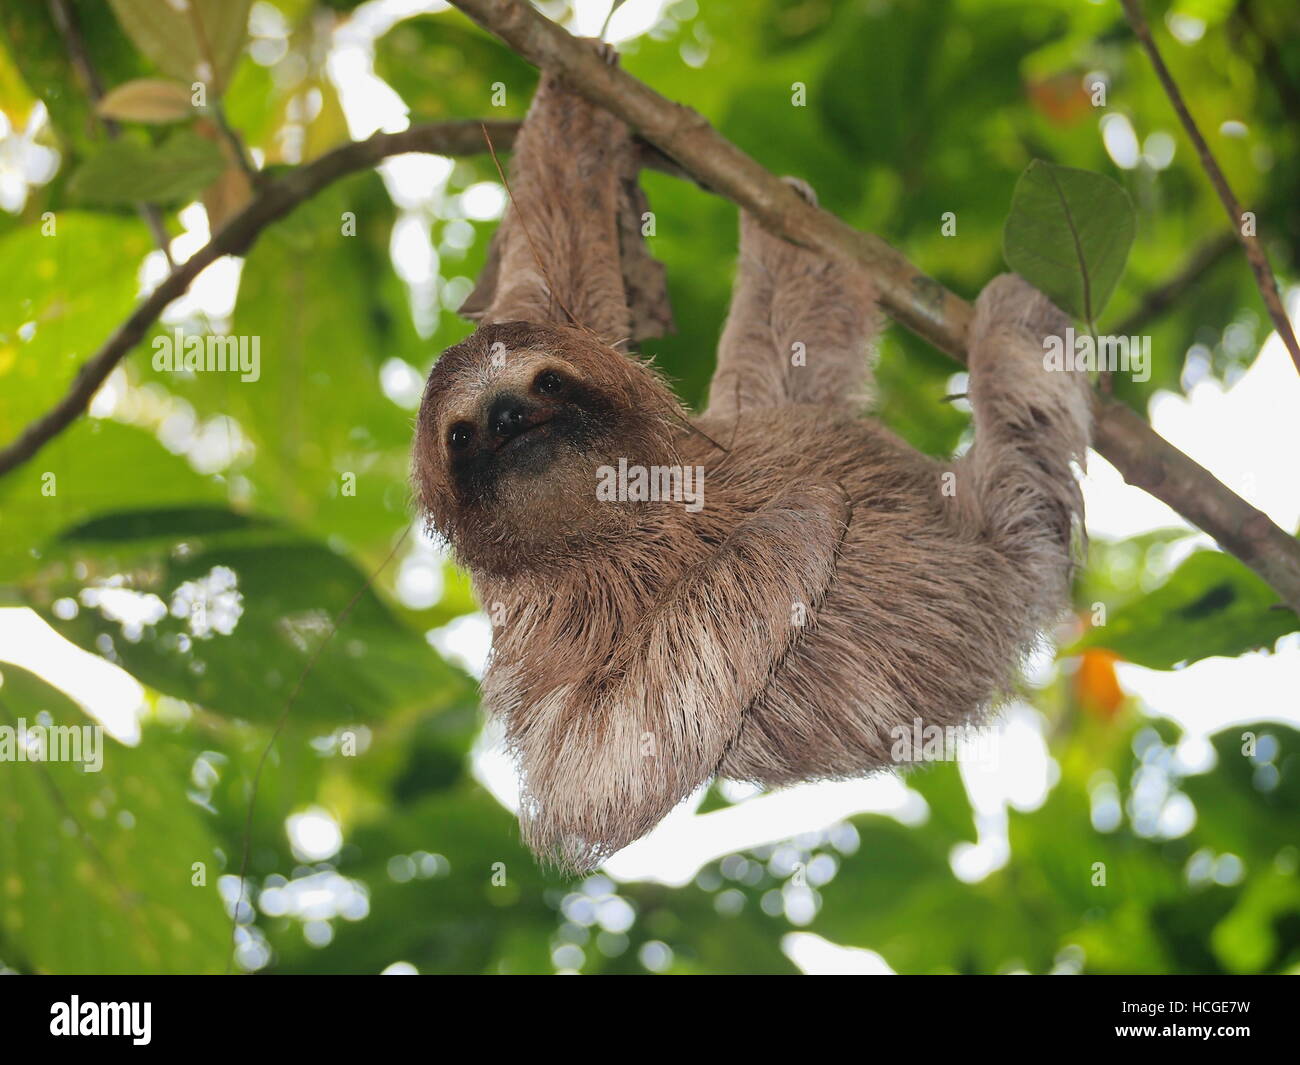 Cute sloth, Bradypus variegatus, hanging from a branch in the forest, wild animal, Panama, Central America Stock Photo